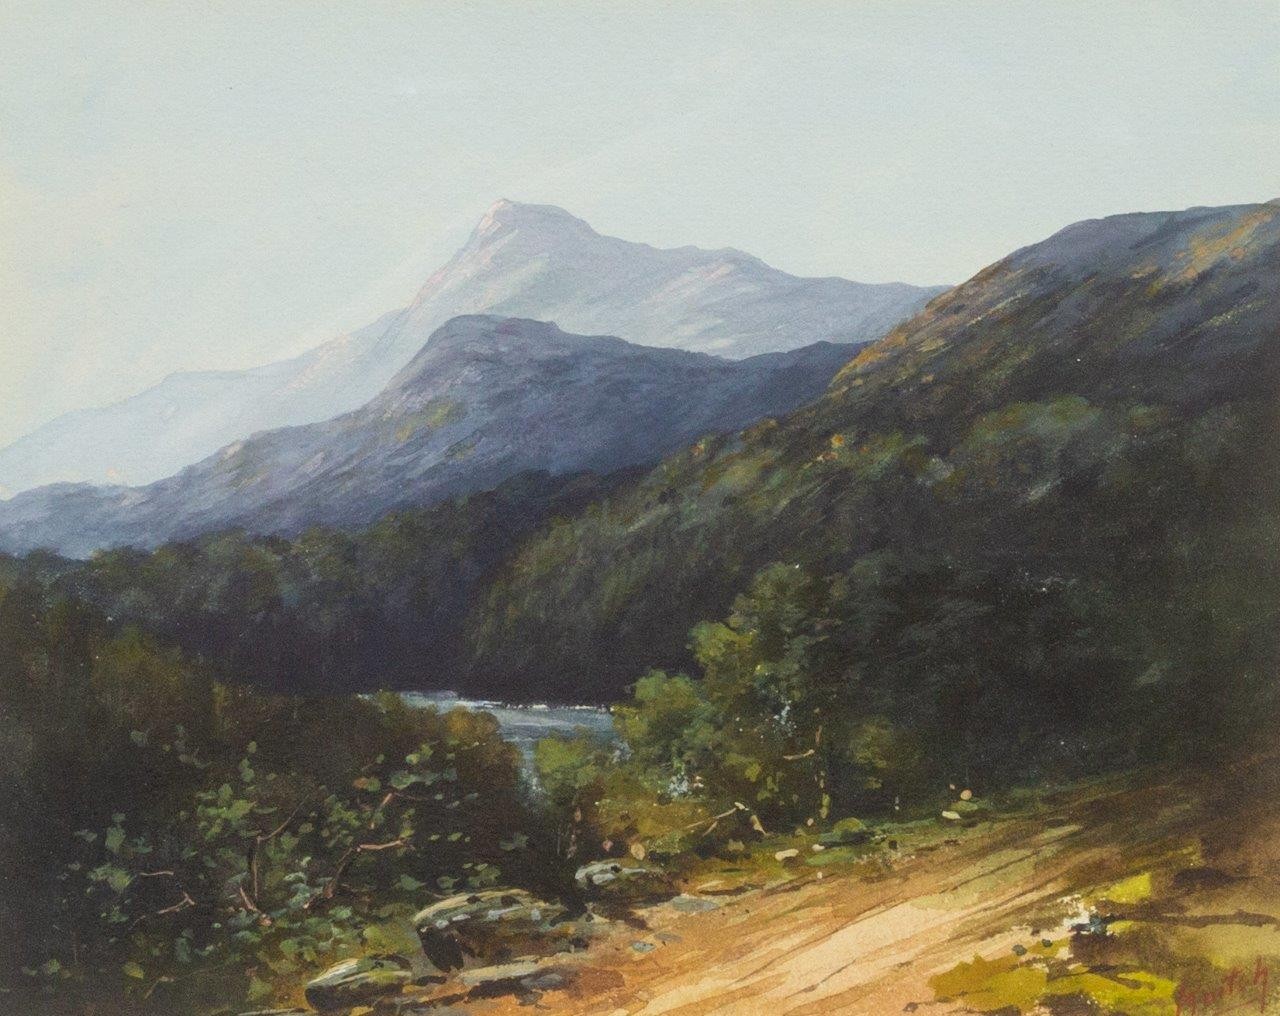 Untitled: Mountain Landscape with Stream, Charles C. Krutch, 1930-1933, 83.99.3